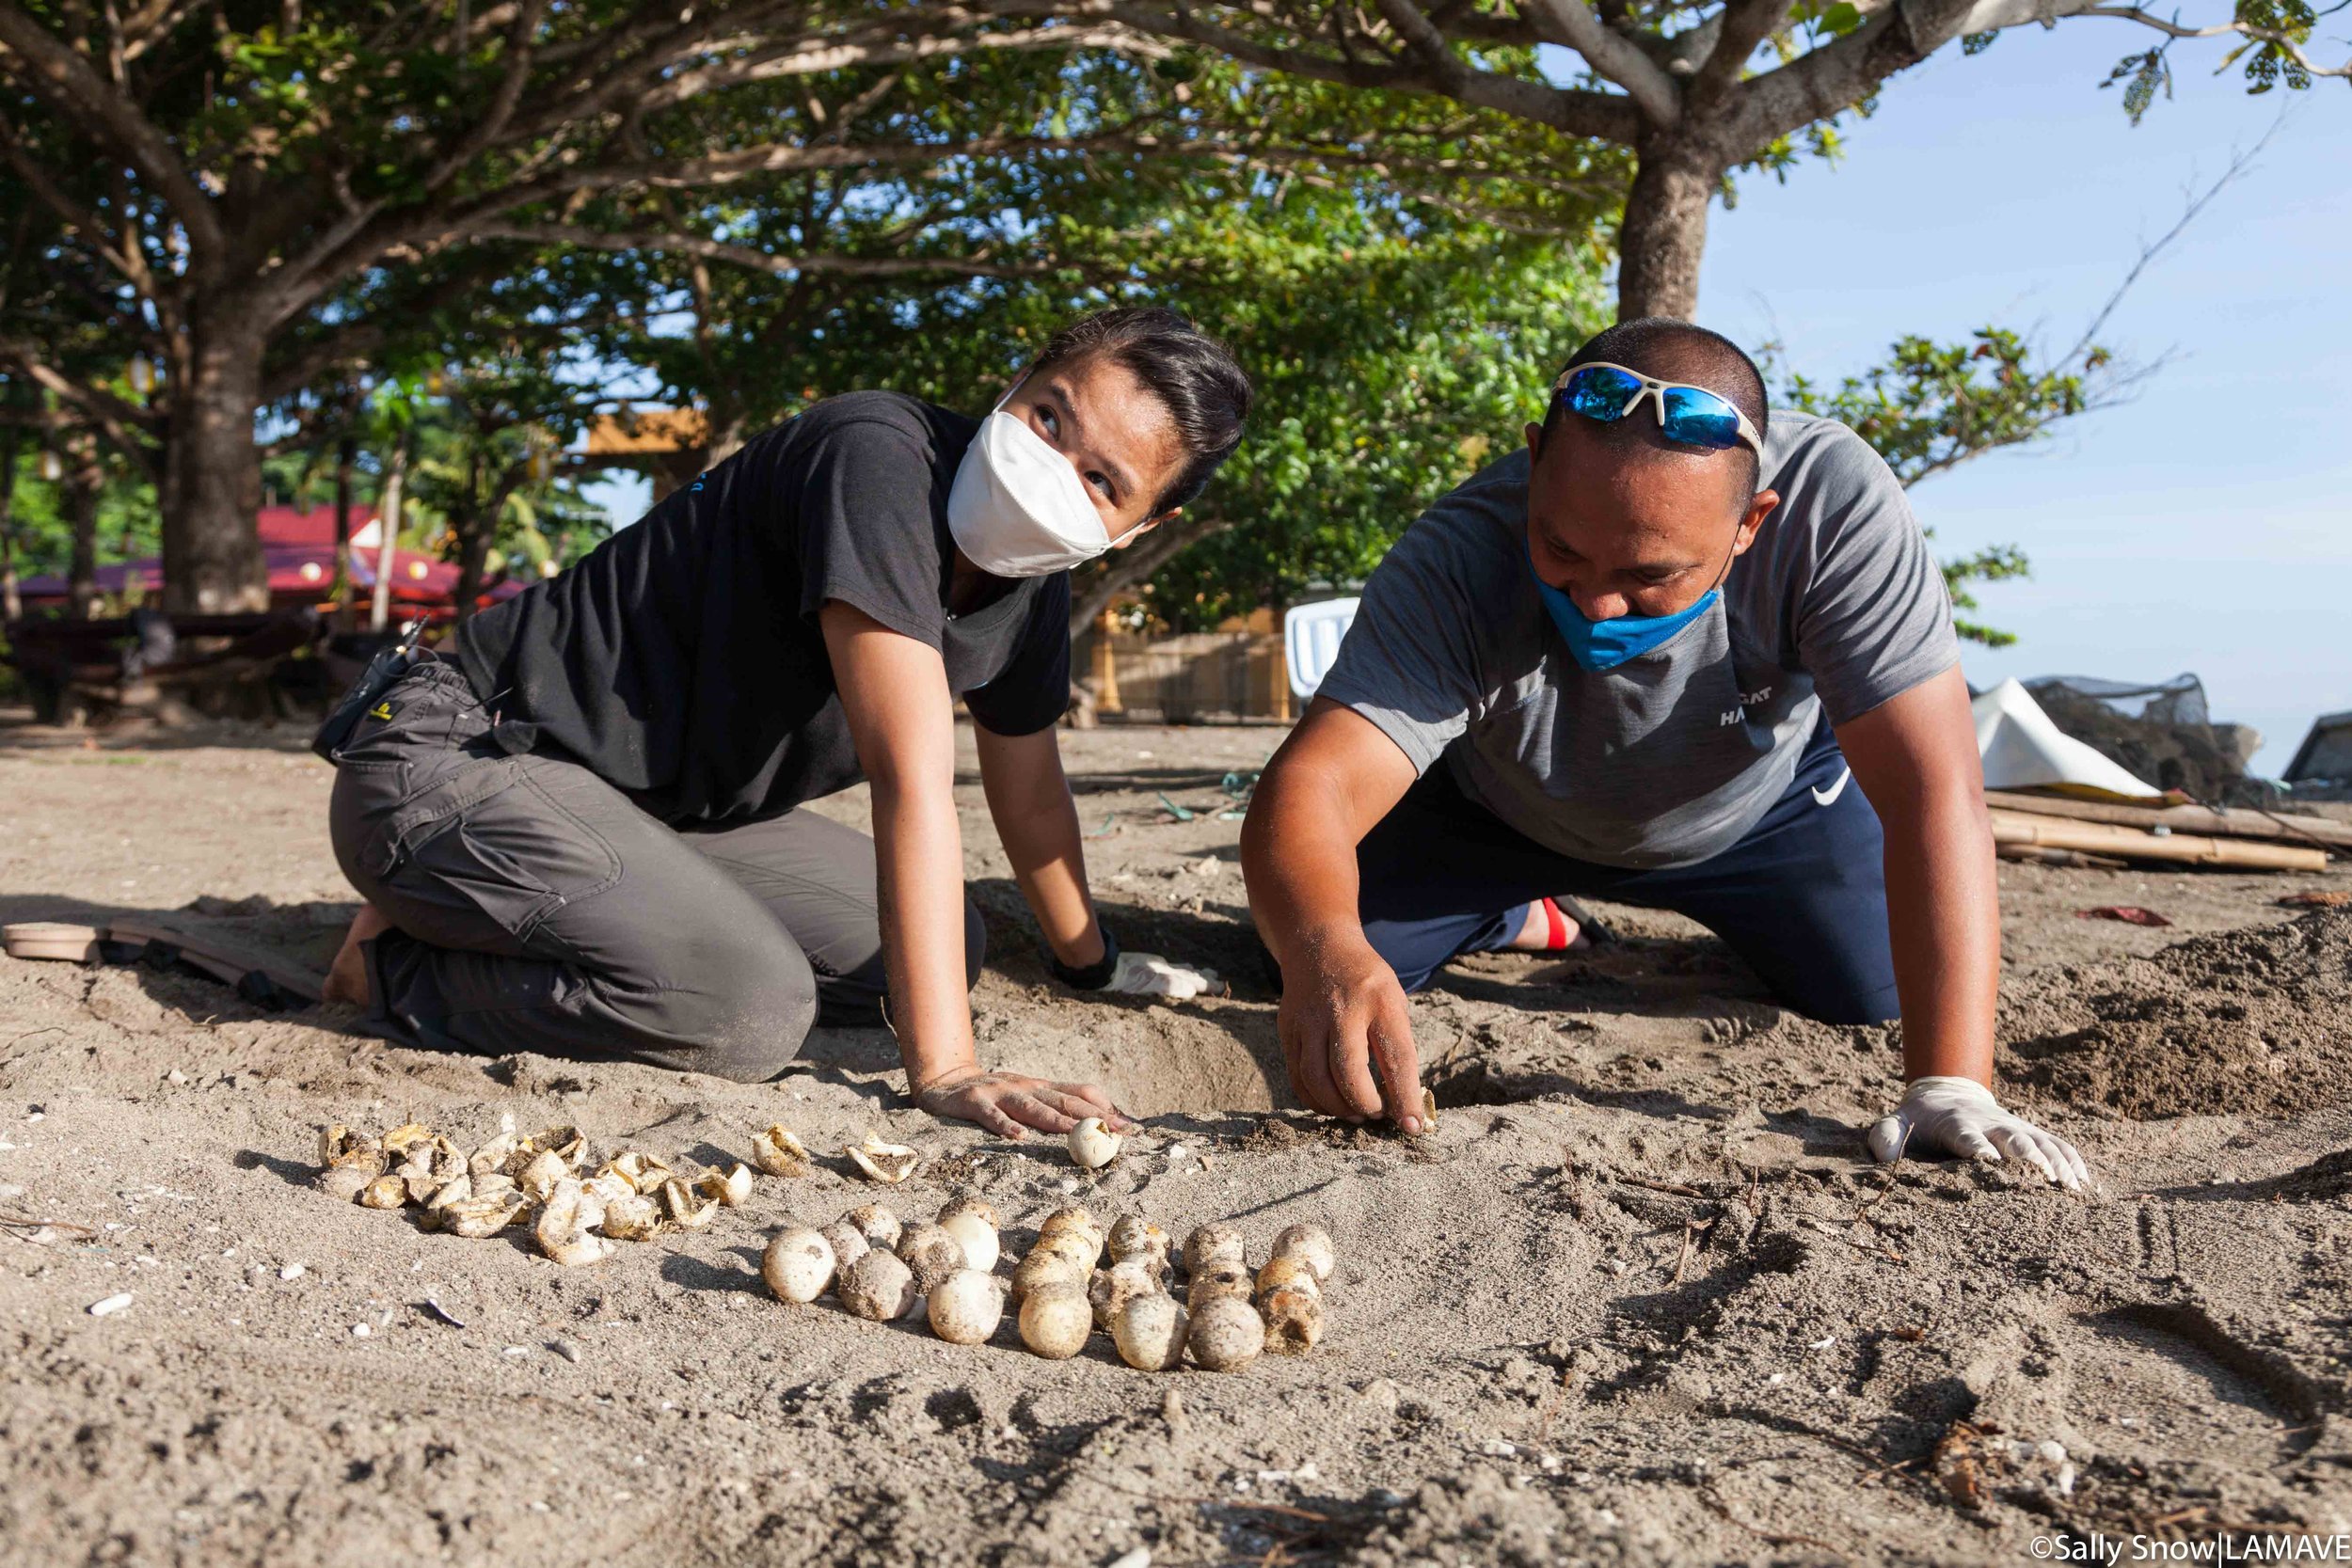  Excavating a relocated turtle nest with Mr Mark Balibalos of DENR. The original nest was flooded by the high tide. Unfortunately despite measures to move the eggs to safety many did not survive.  